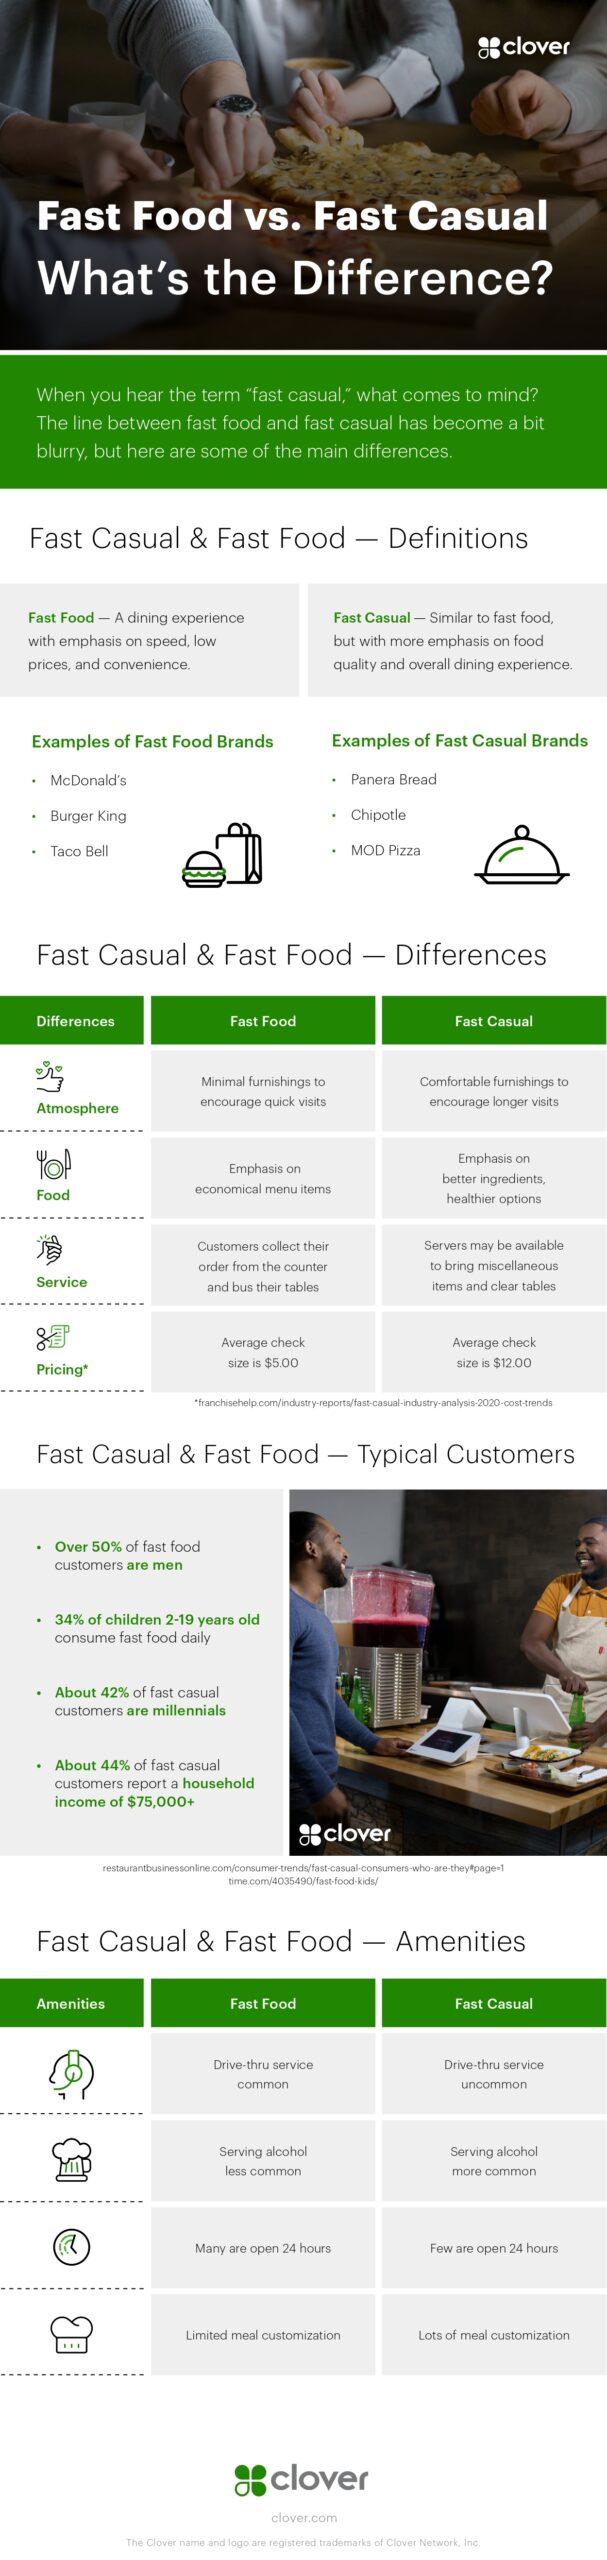 Fast Food Vs Fast Casual What’s The Difference?